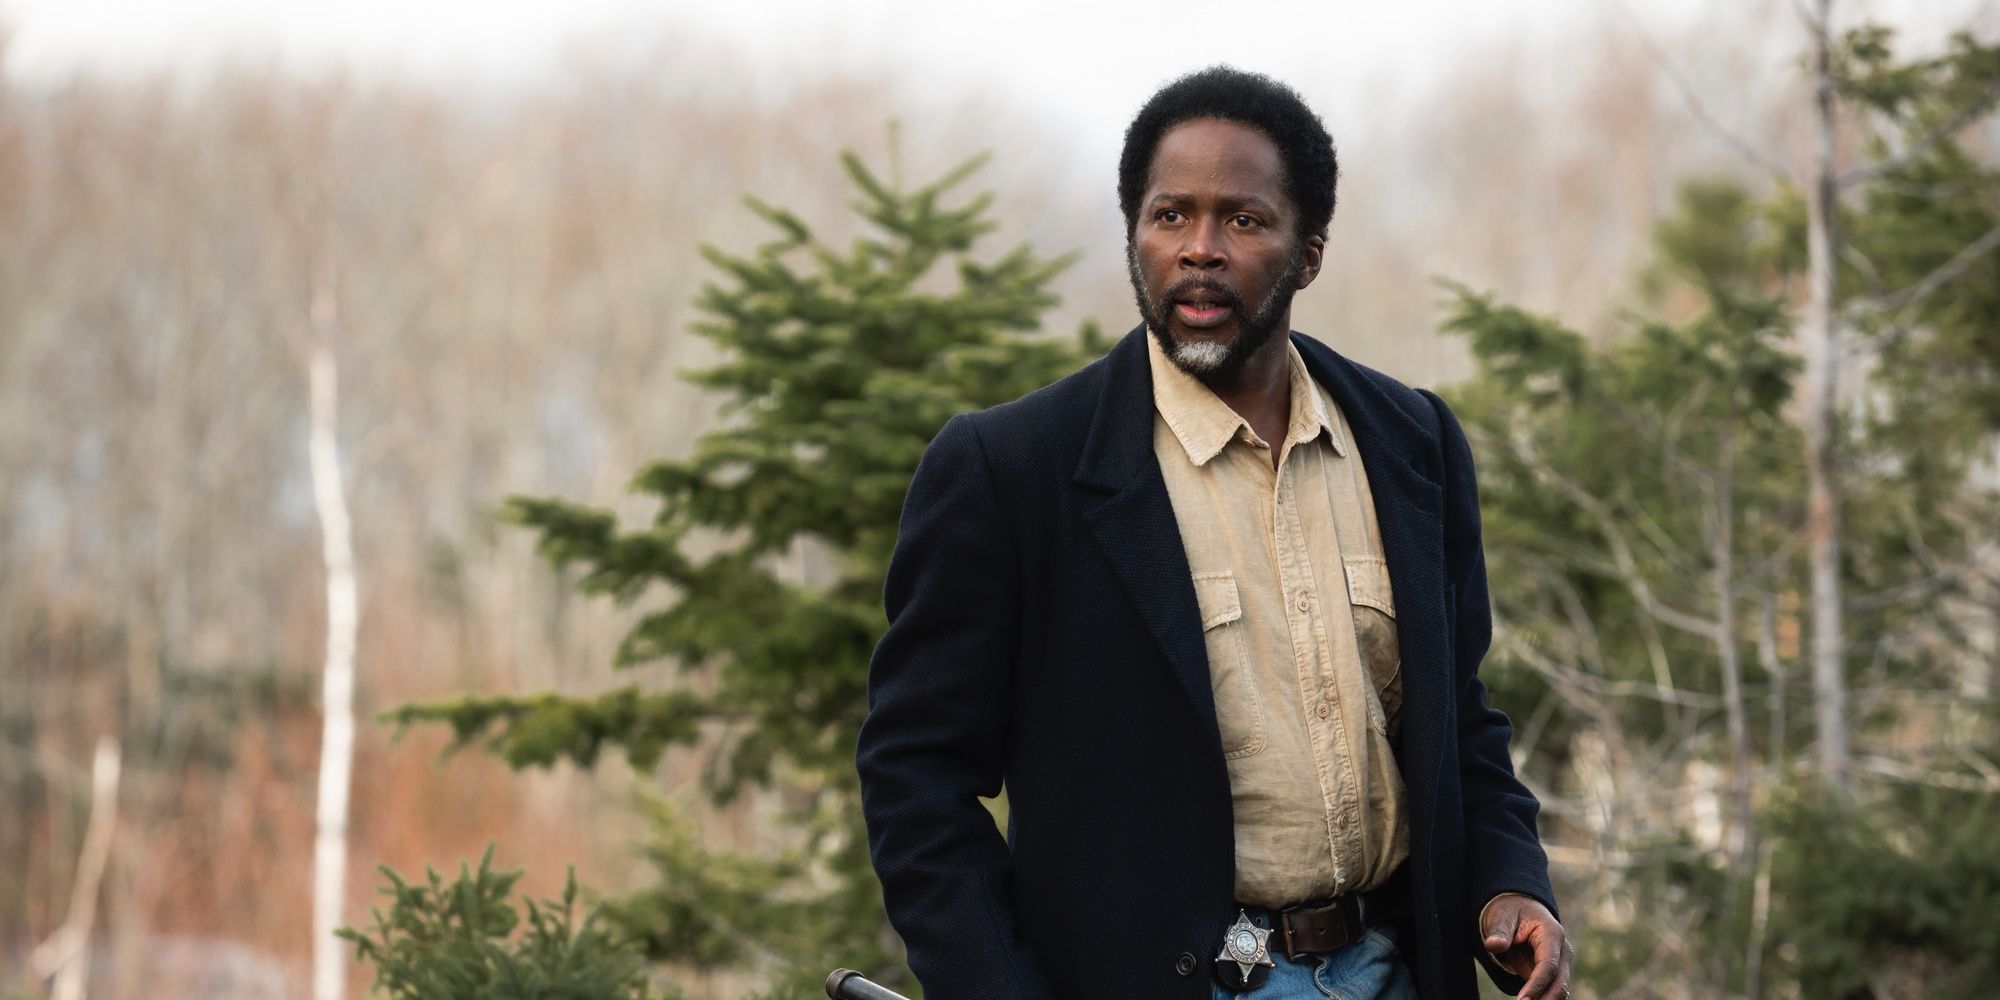 Harold Perrineau as Boyd in front of Christmas trees in the From season 2 finale